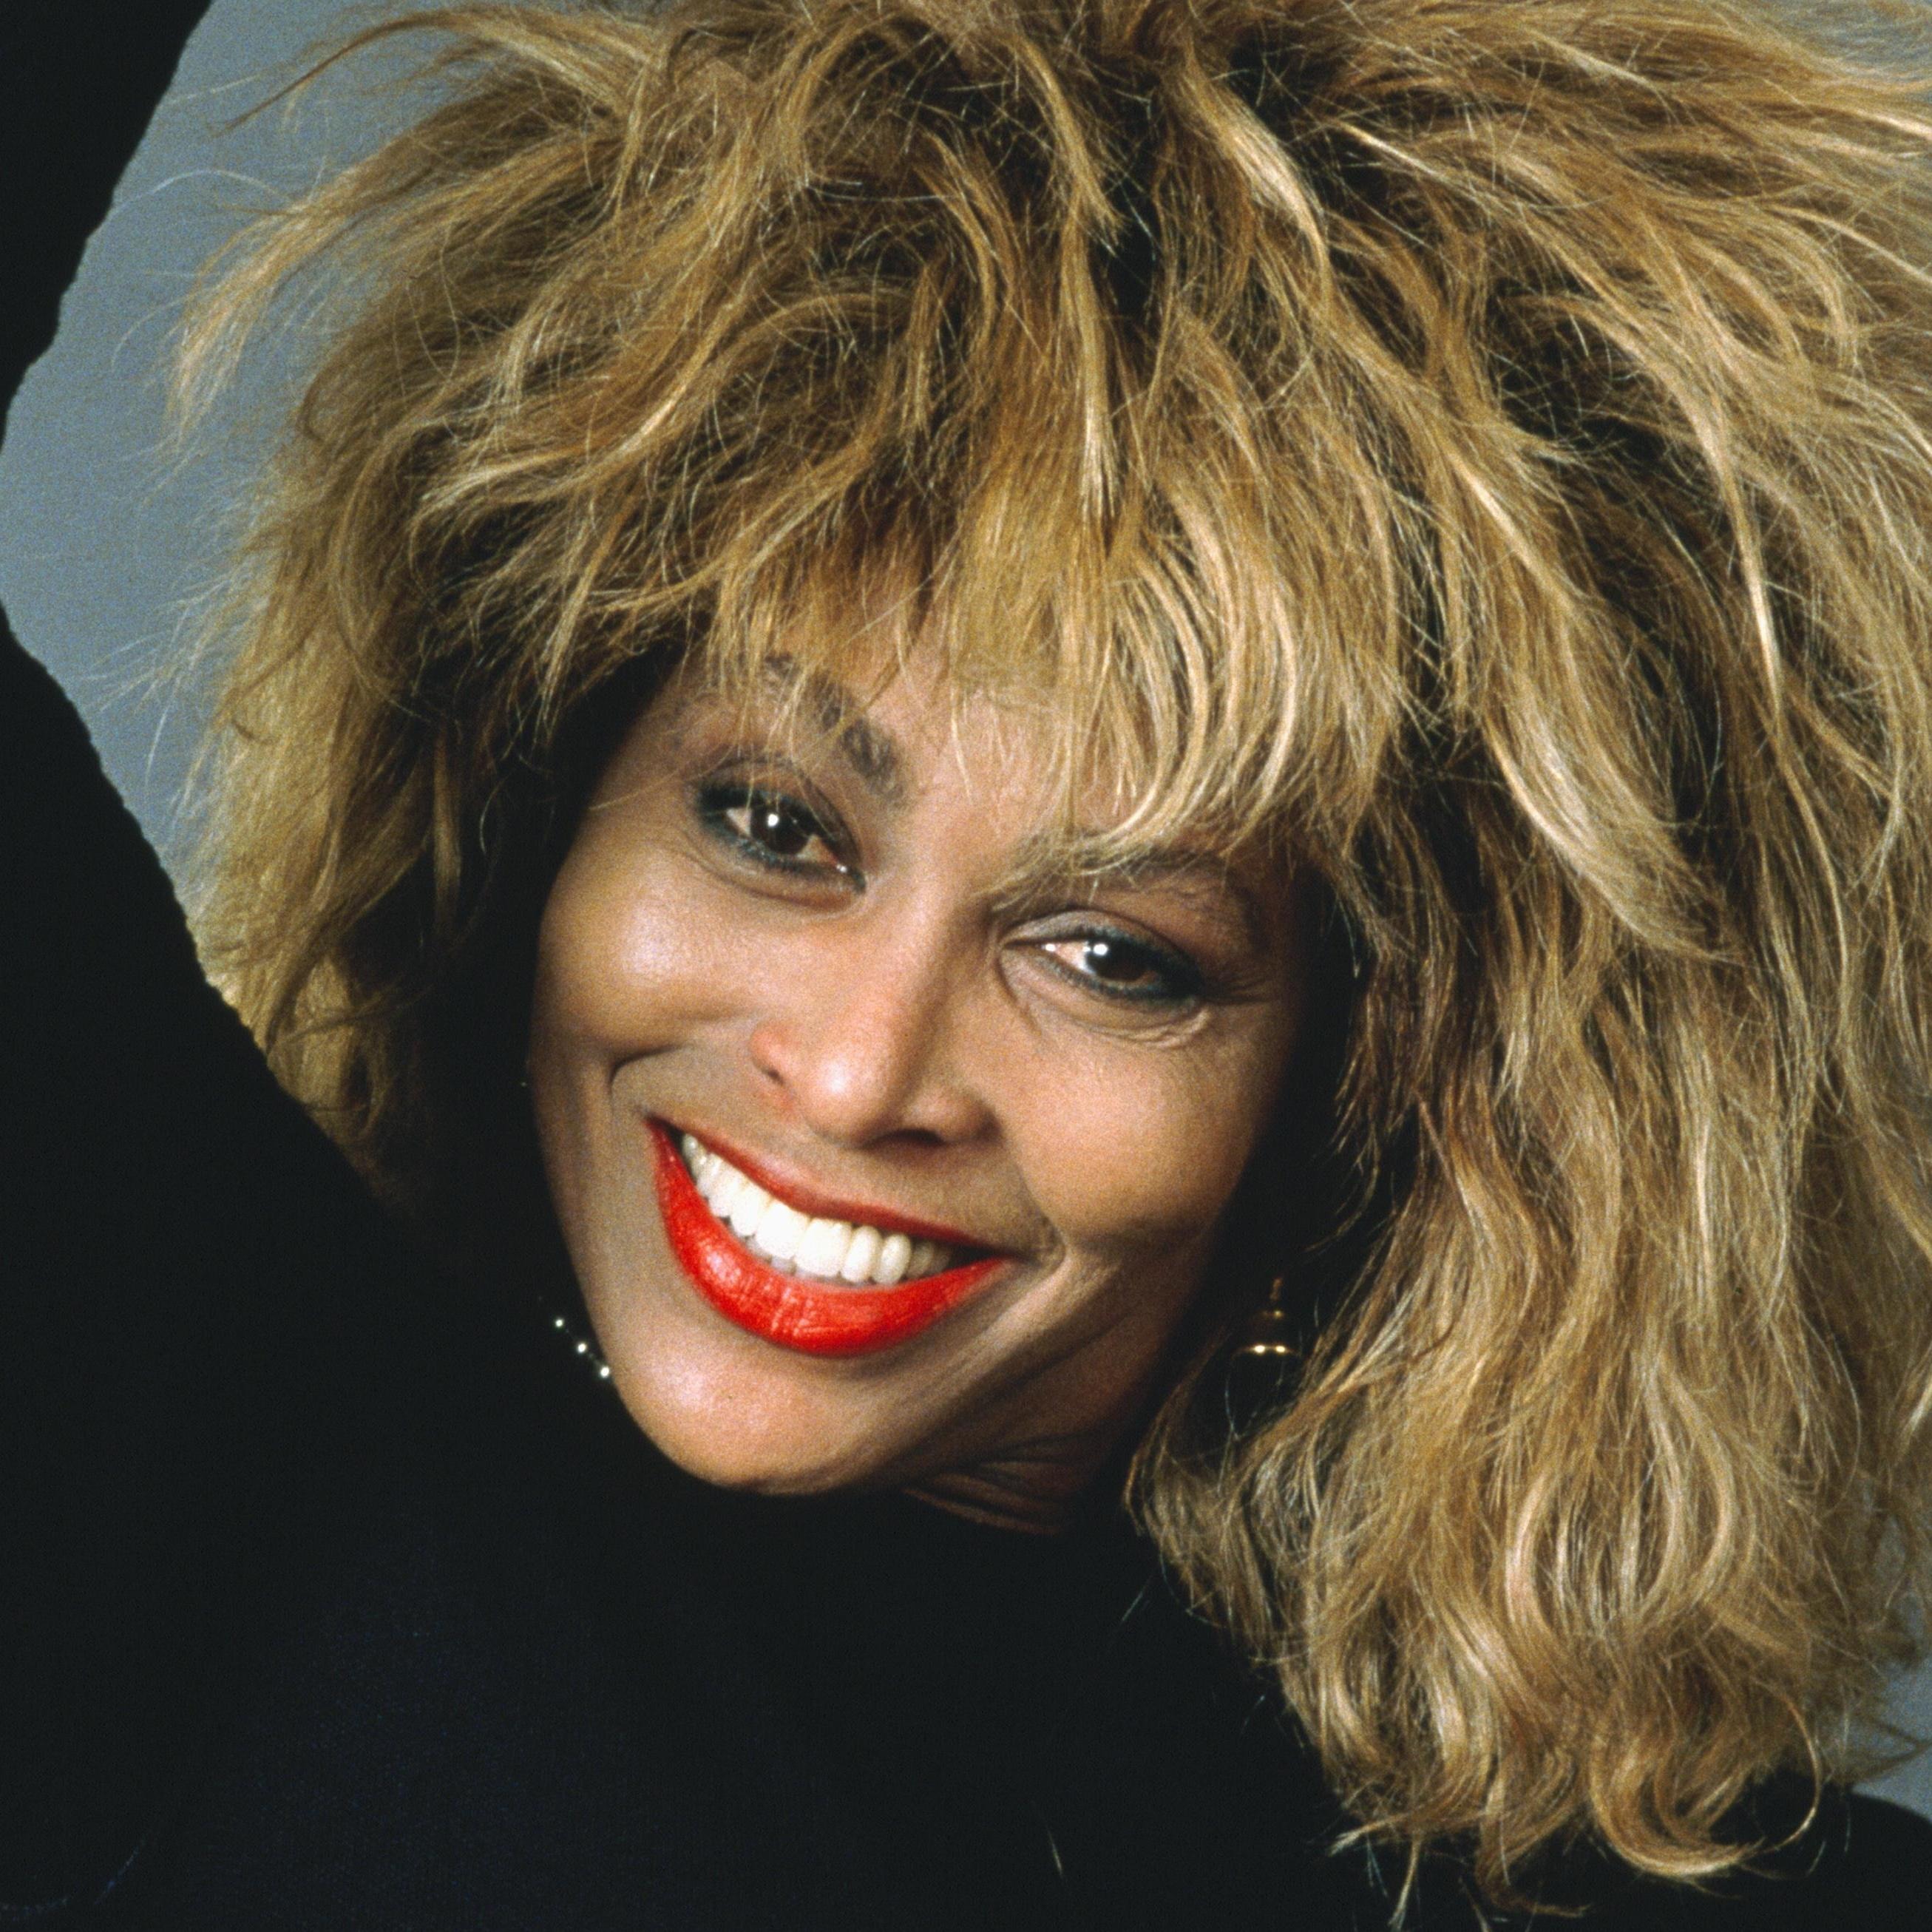 that in2017 Tina Turner received a kidney donated by her husband.